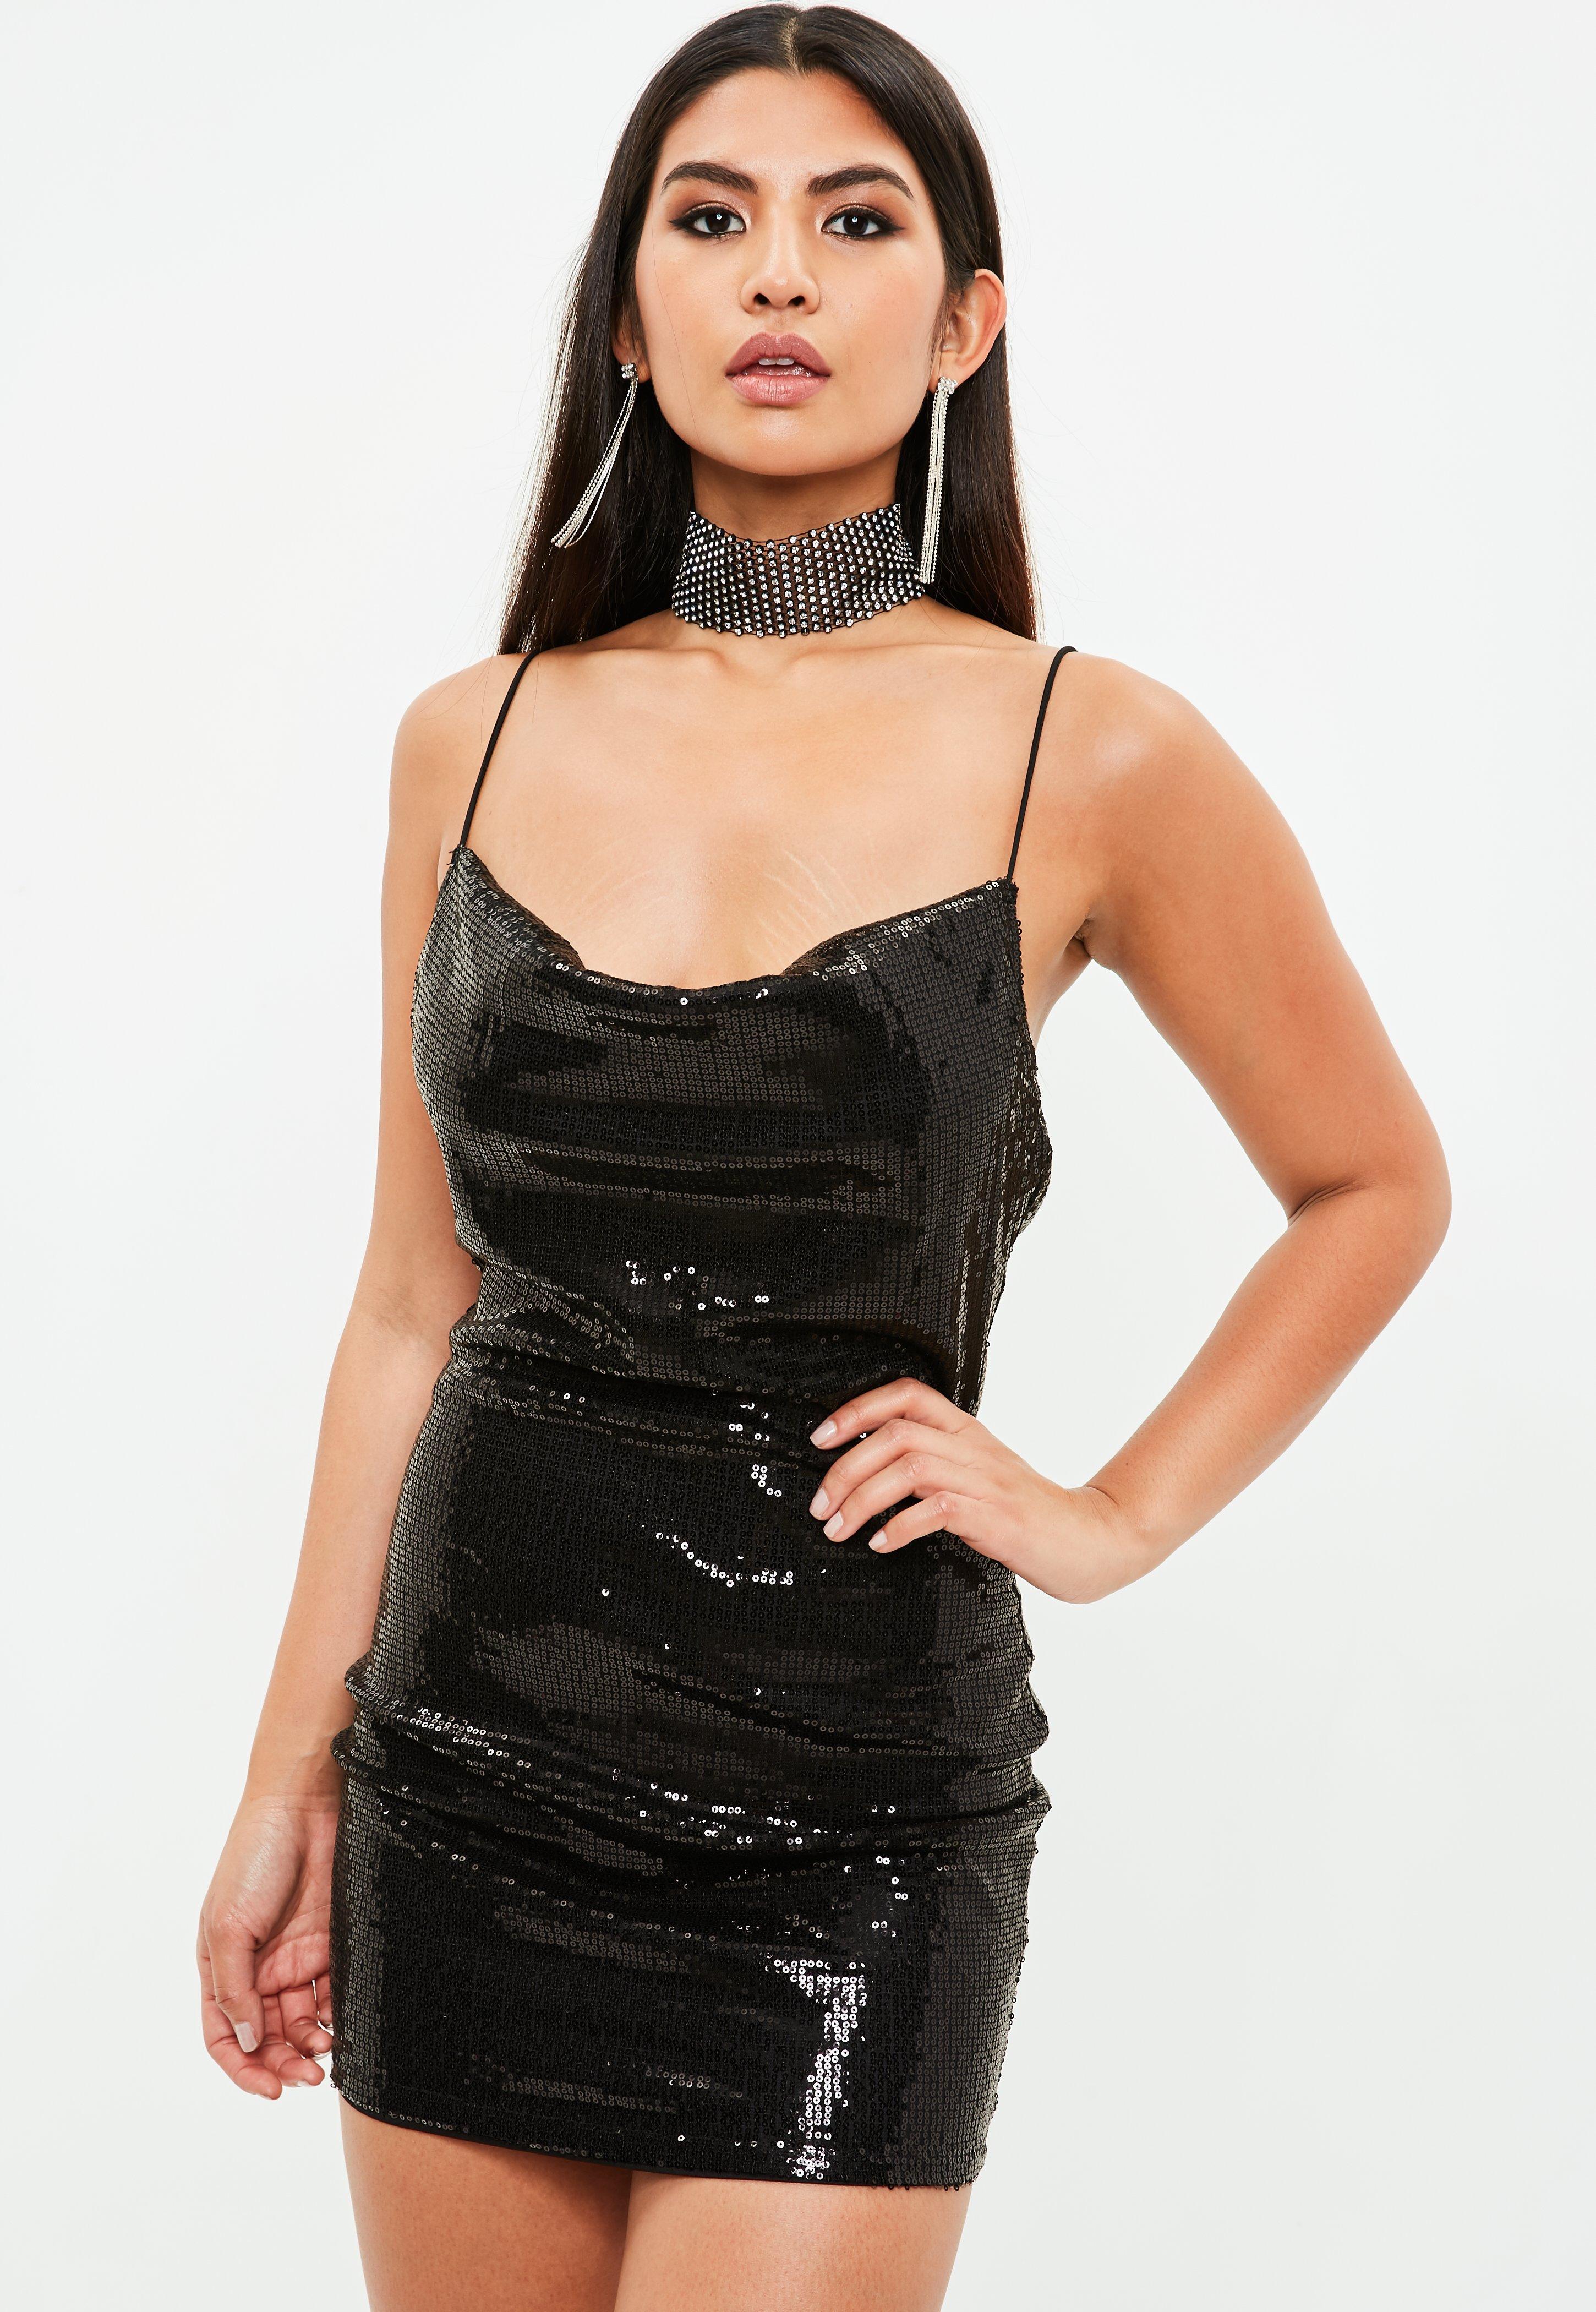 Lyst - Missguided Black Strappy Sequin Cowl Bodycon Dress in Black